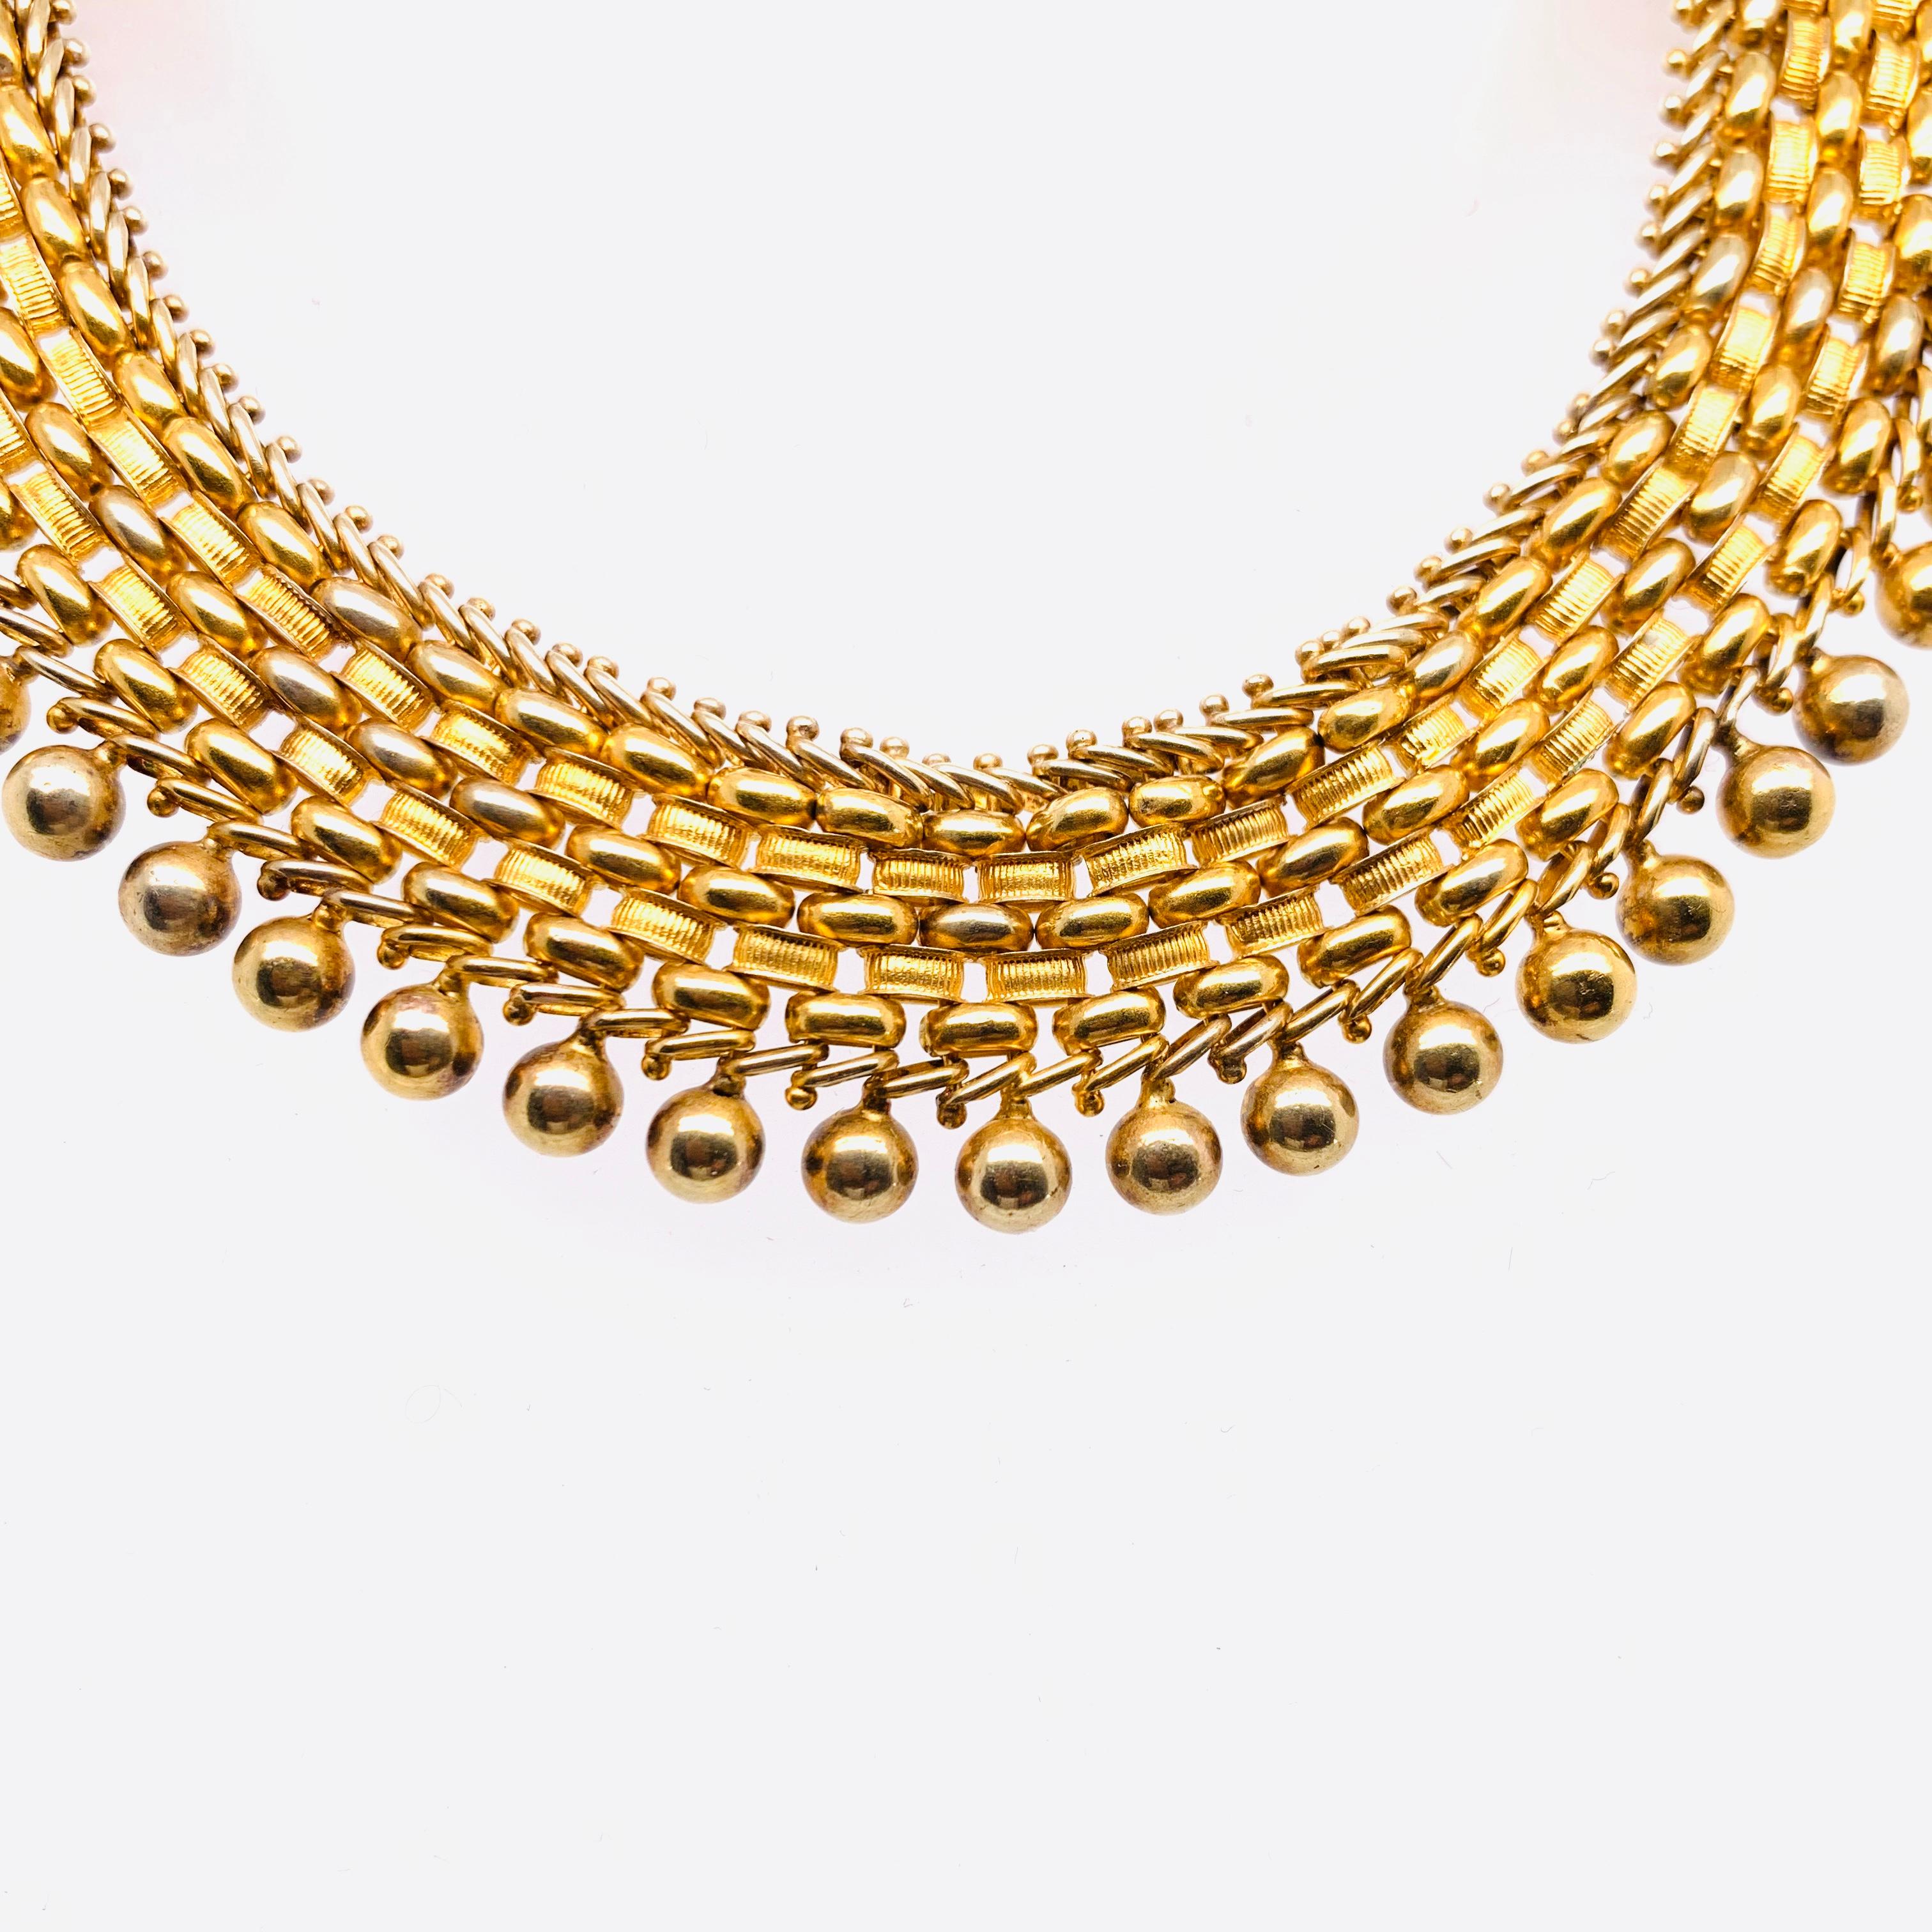 A Victorian gold collar necklace, with a woven design, featuring three rows of D cross-section, polished, links, alternating with two rows of reeded links, flanked by diagonal wire links, with gold bead detail around the outer edge. With a concealed